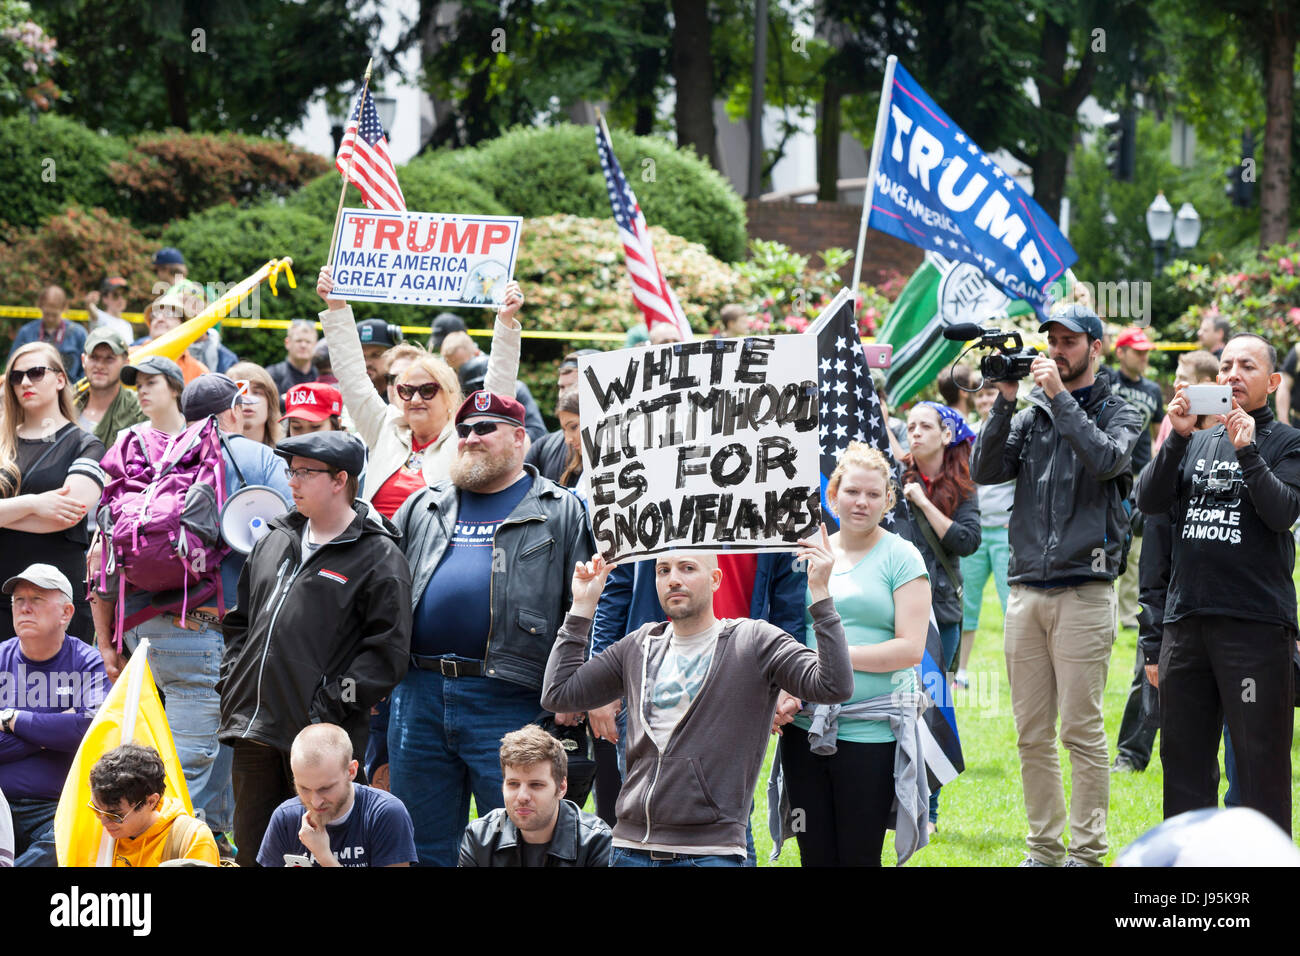 Portland, United States. 04th June, 2017. Portland, Oregon: Supporters at the Trump Free Speech Rally Portland. Organized by Joey Gibson, a leader of the Patriot Prayer group, the rally in downtown Portland featured right-wing nationalist Kyle Chapman and speakers in support of free speech and President Trump. Credit: Paul Gordon/Alamy Live News Stock Photo